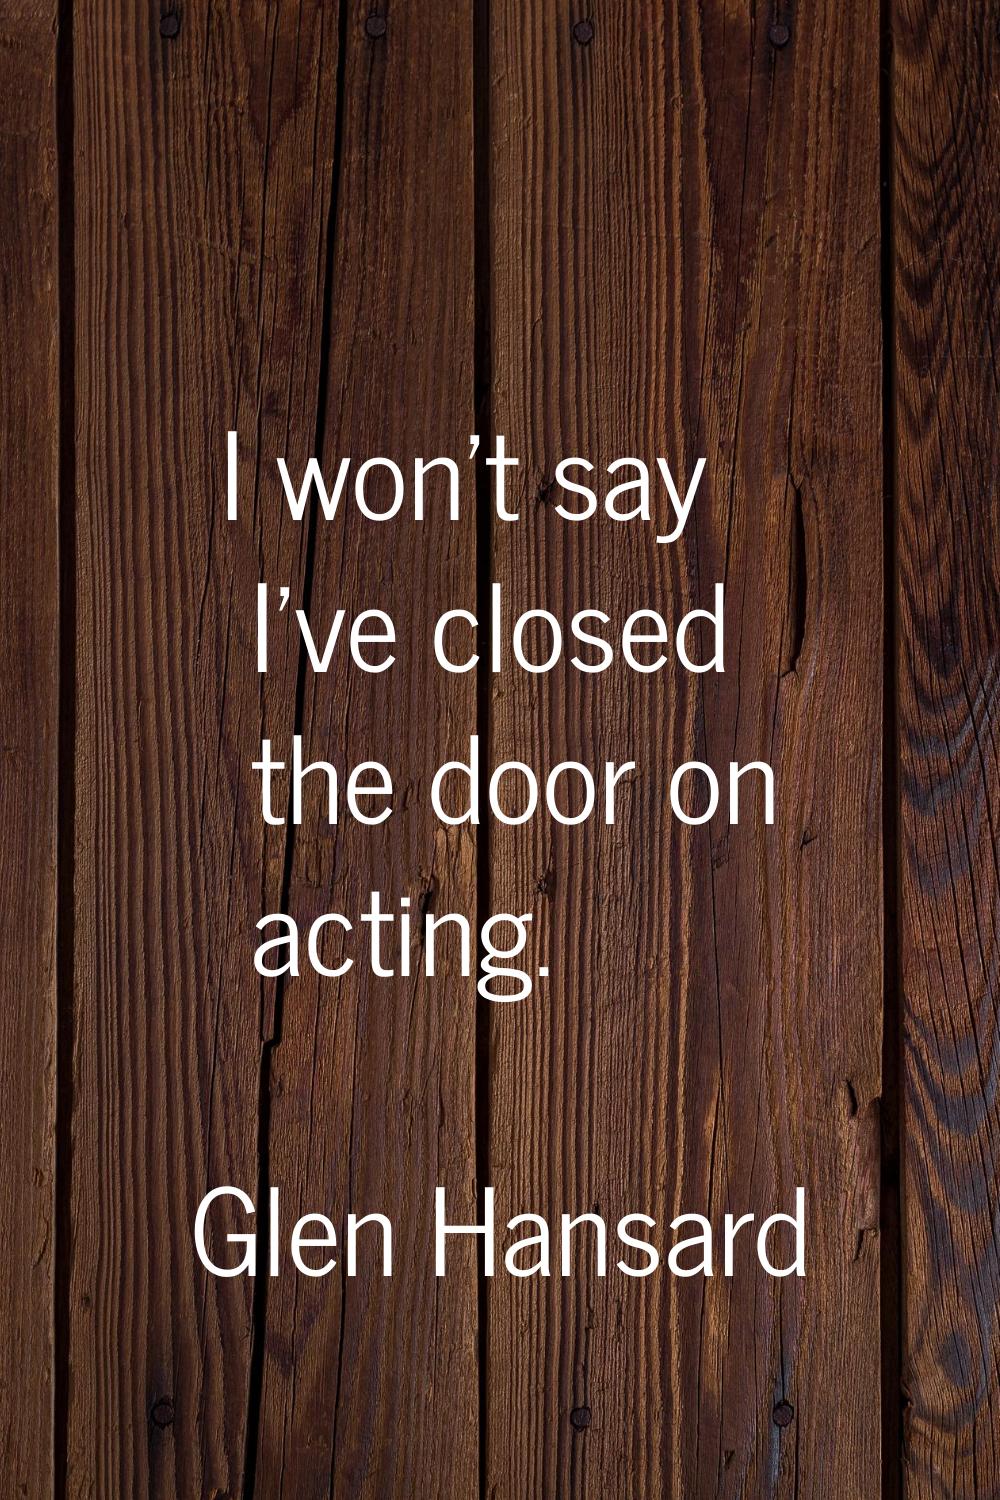 I won't say I've closed the door on acting.